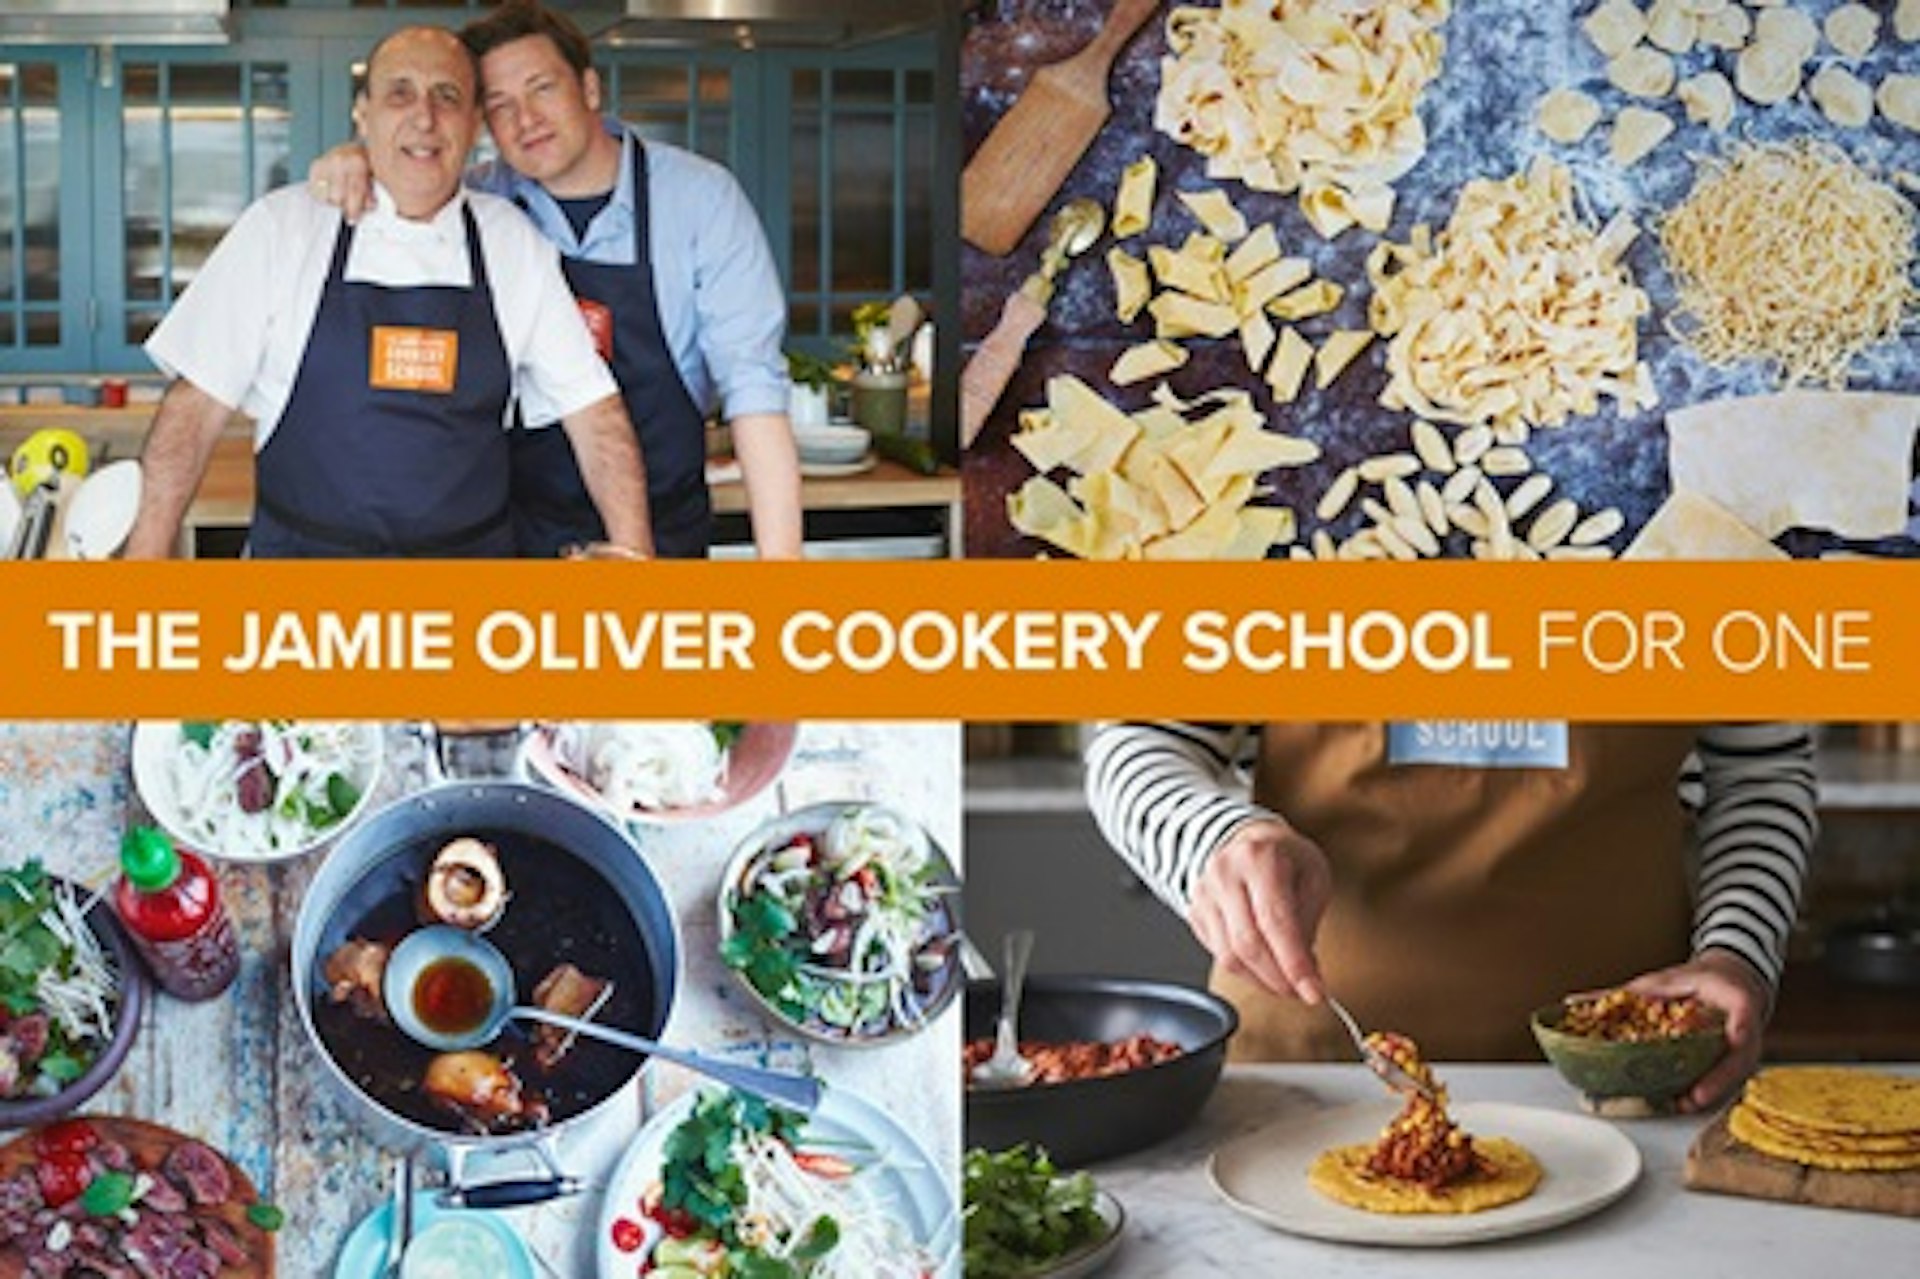 Cookery Class at The Jamie Oliver Cookery School 1